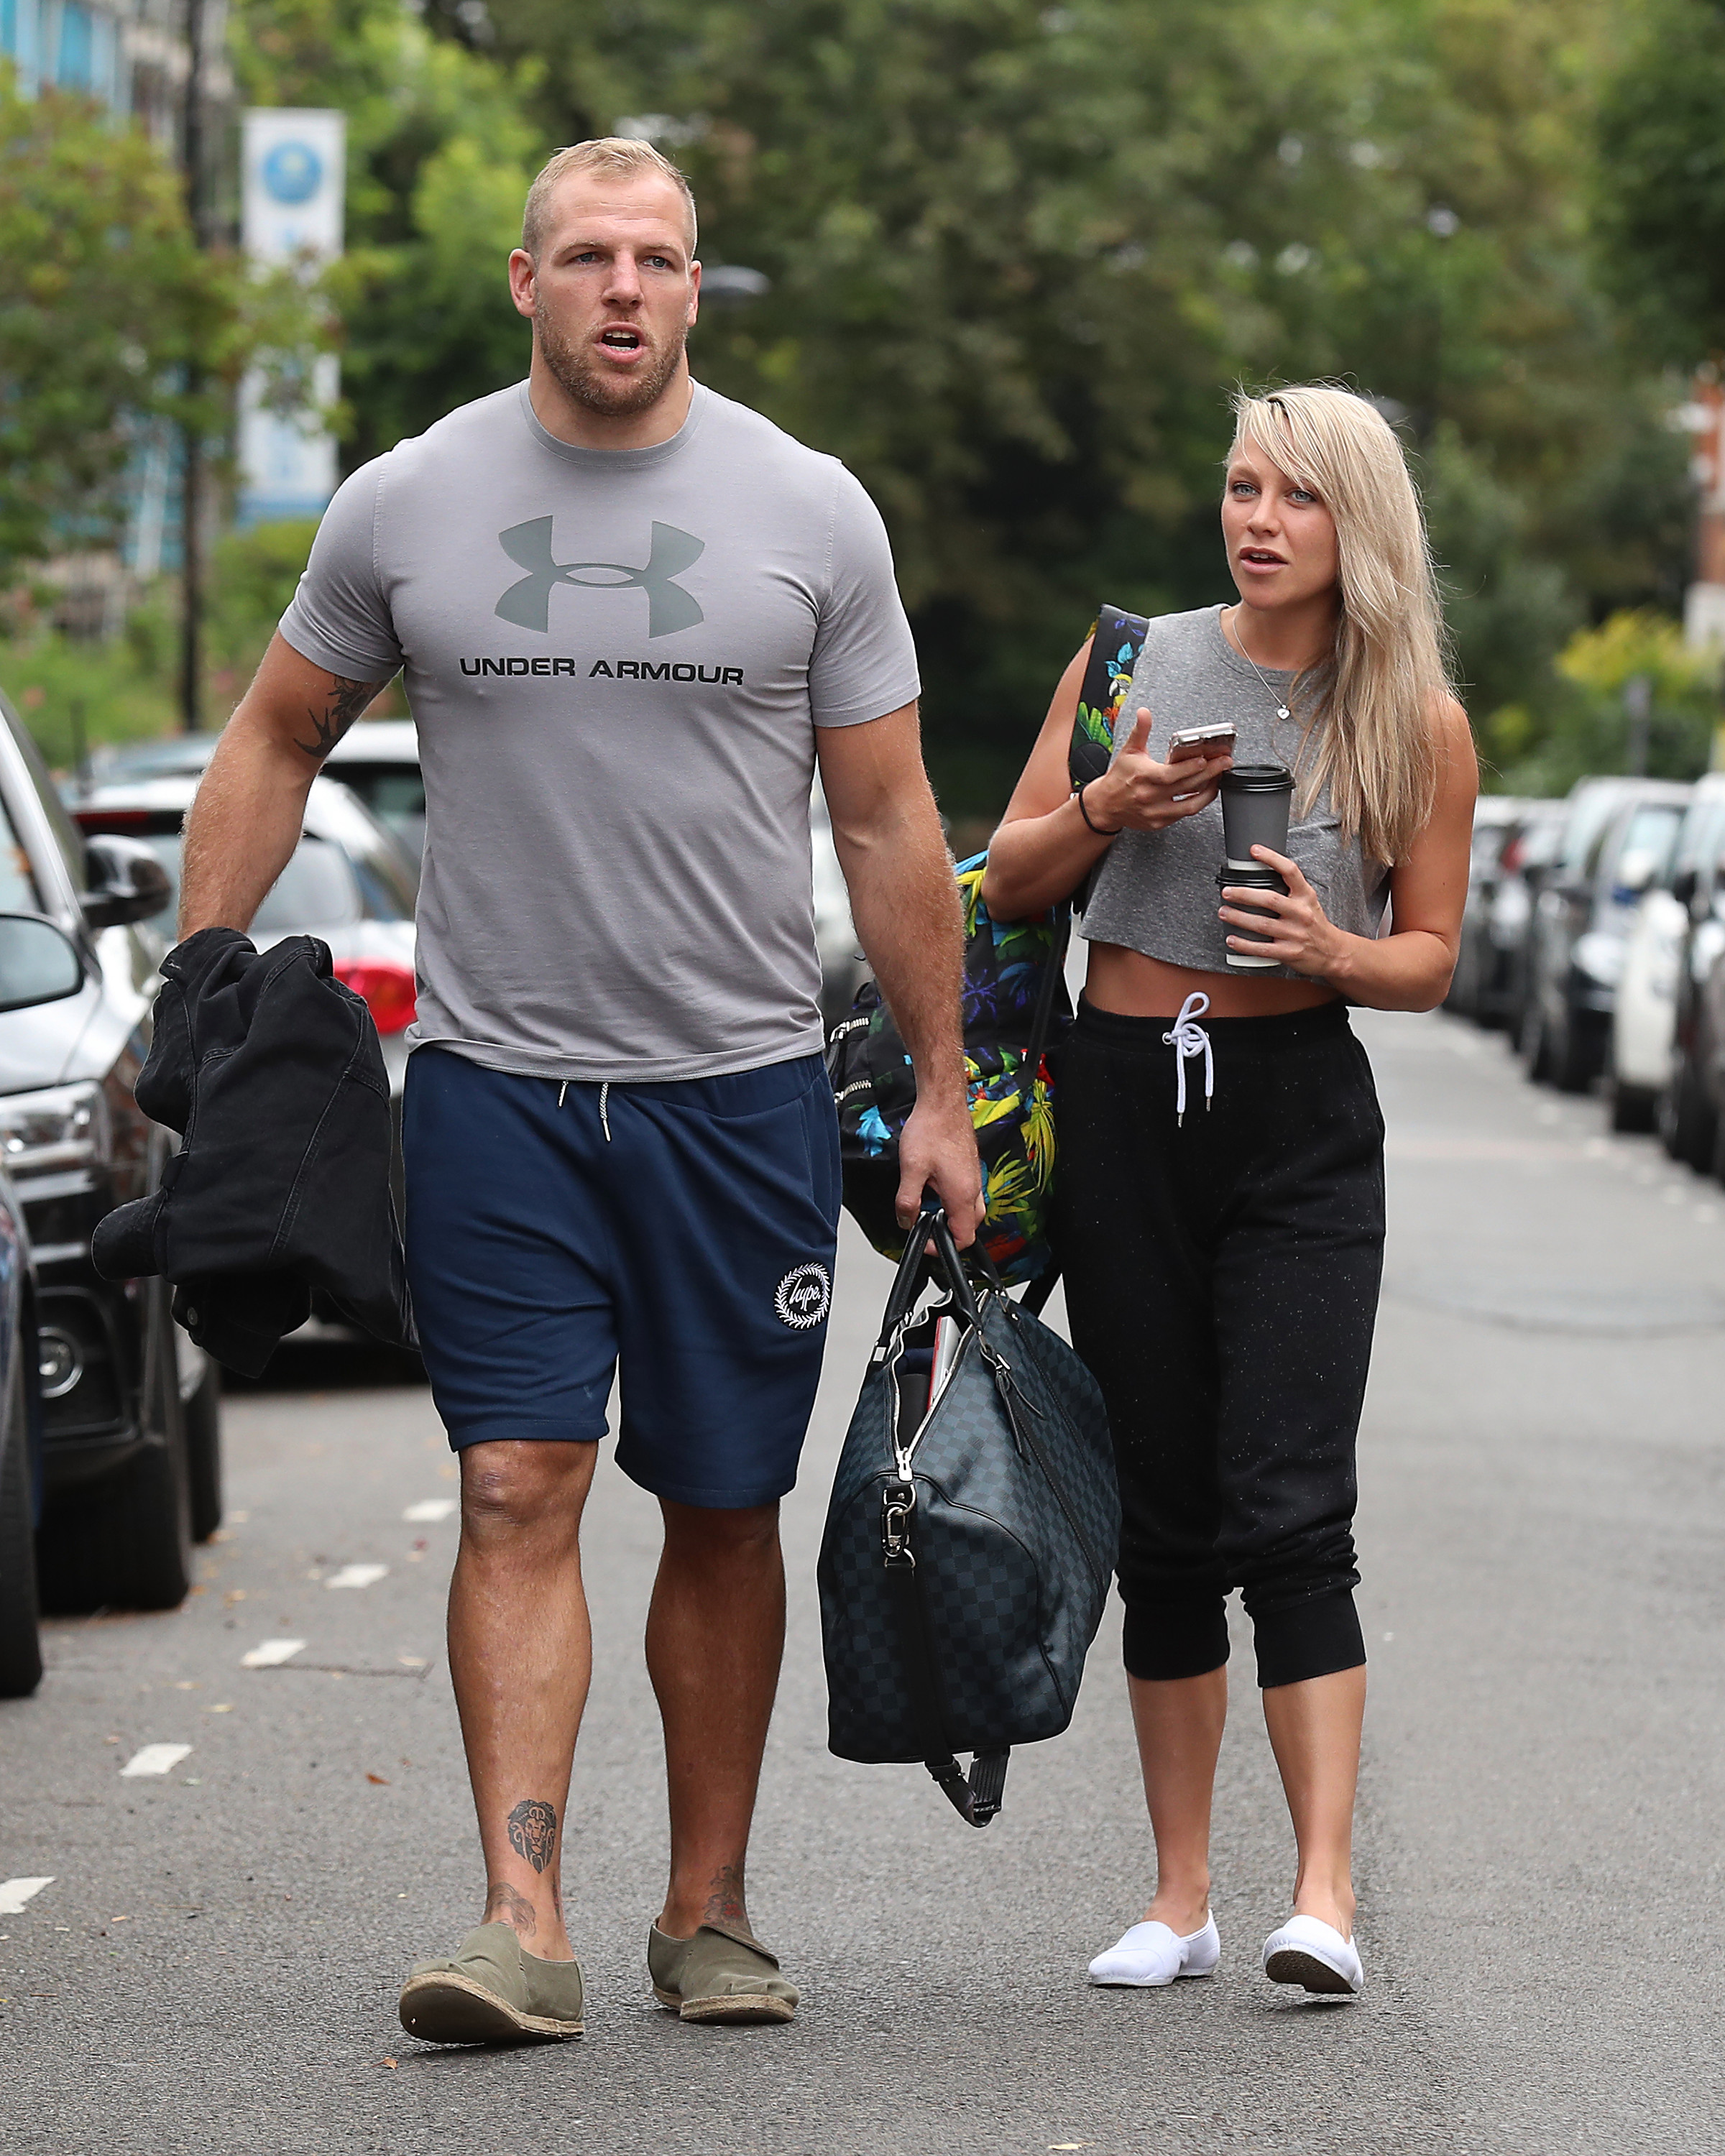 Chloe Madeley And James Haskell Wedding Love Passion And Controversy